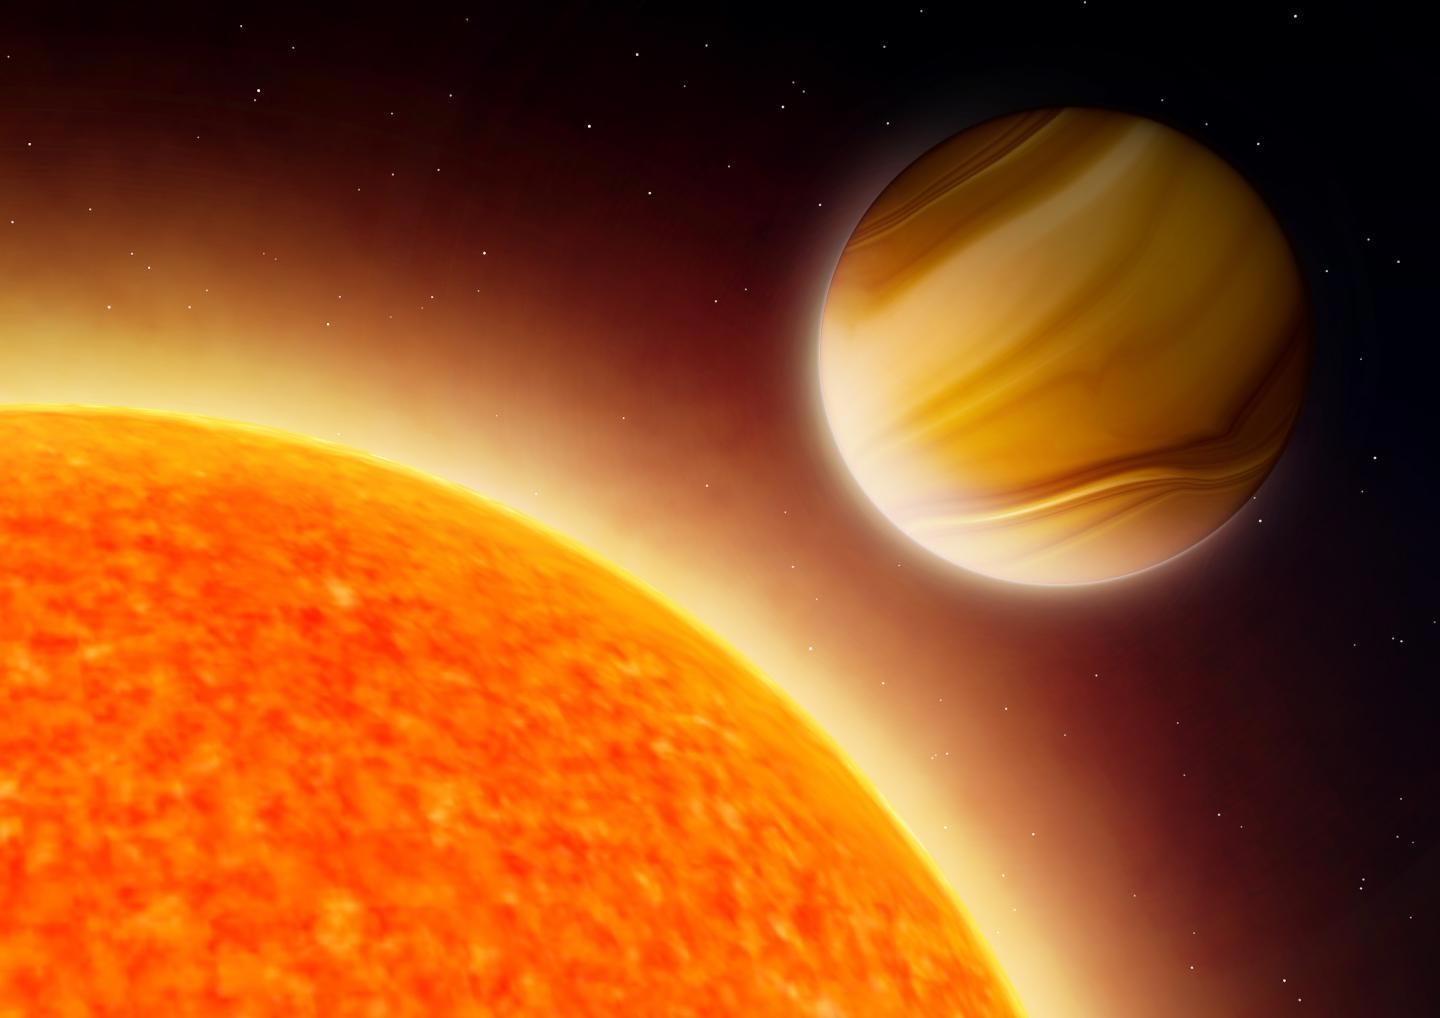 Many Exoplanets Have Water, but Usually Not Very Much - SciTechDaily